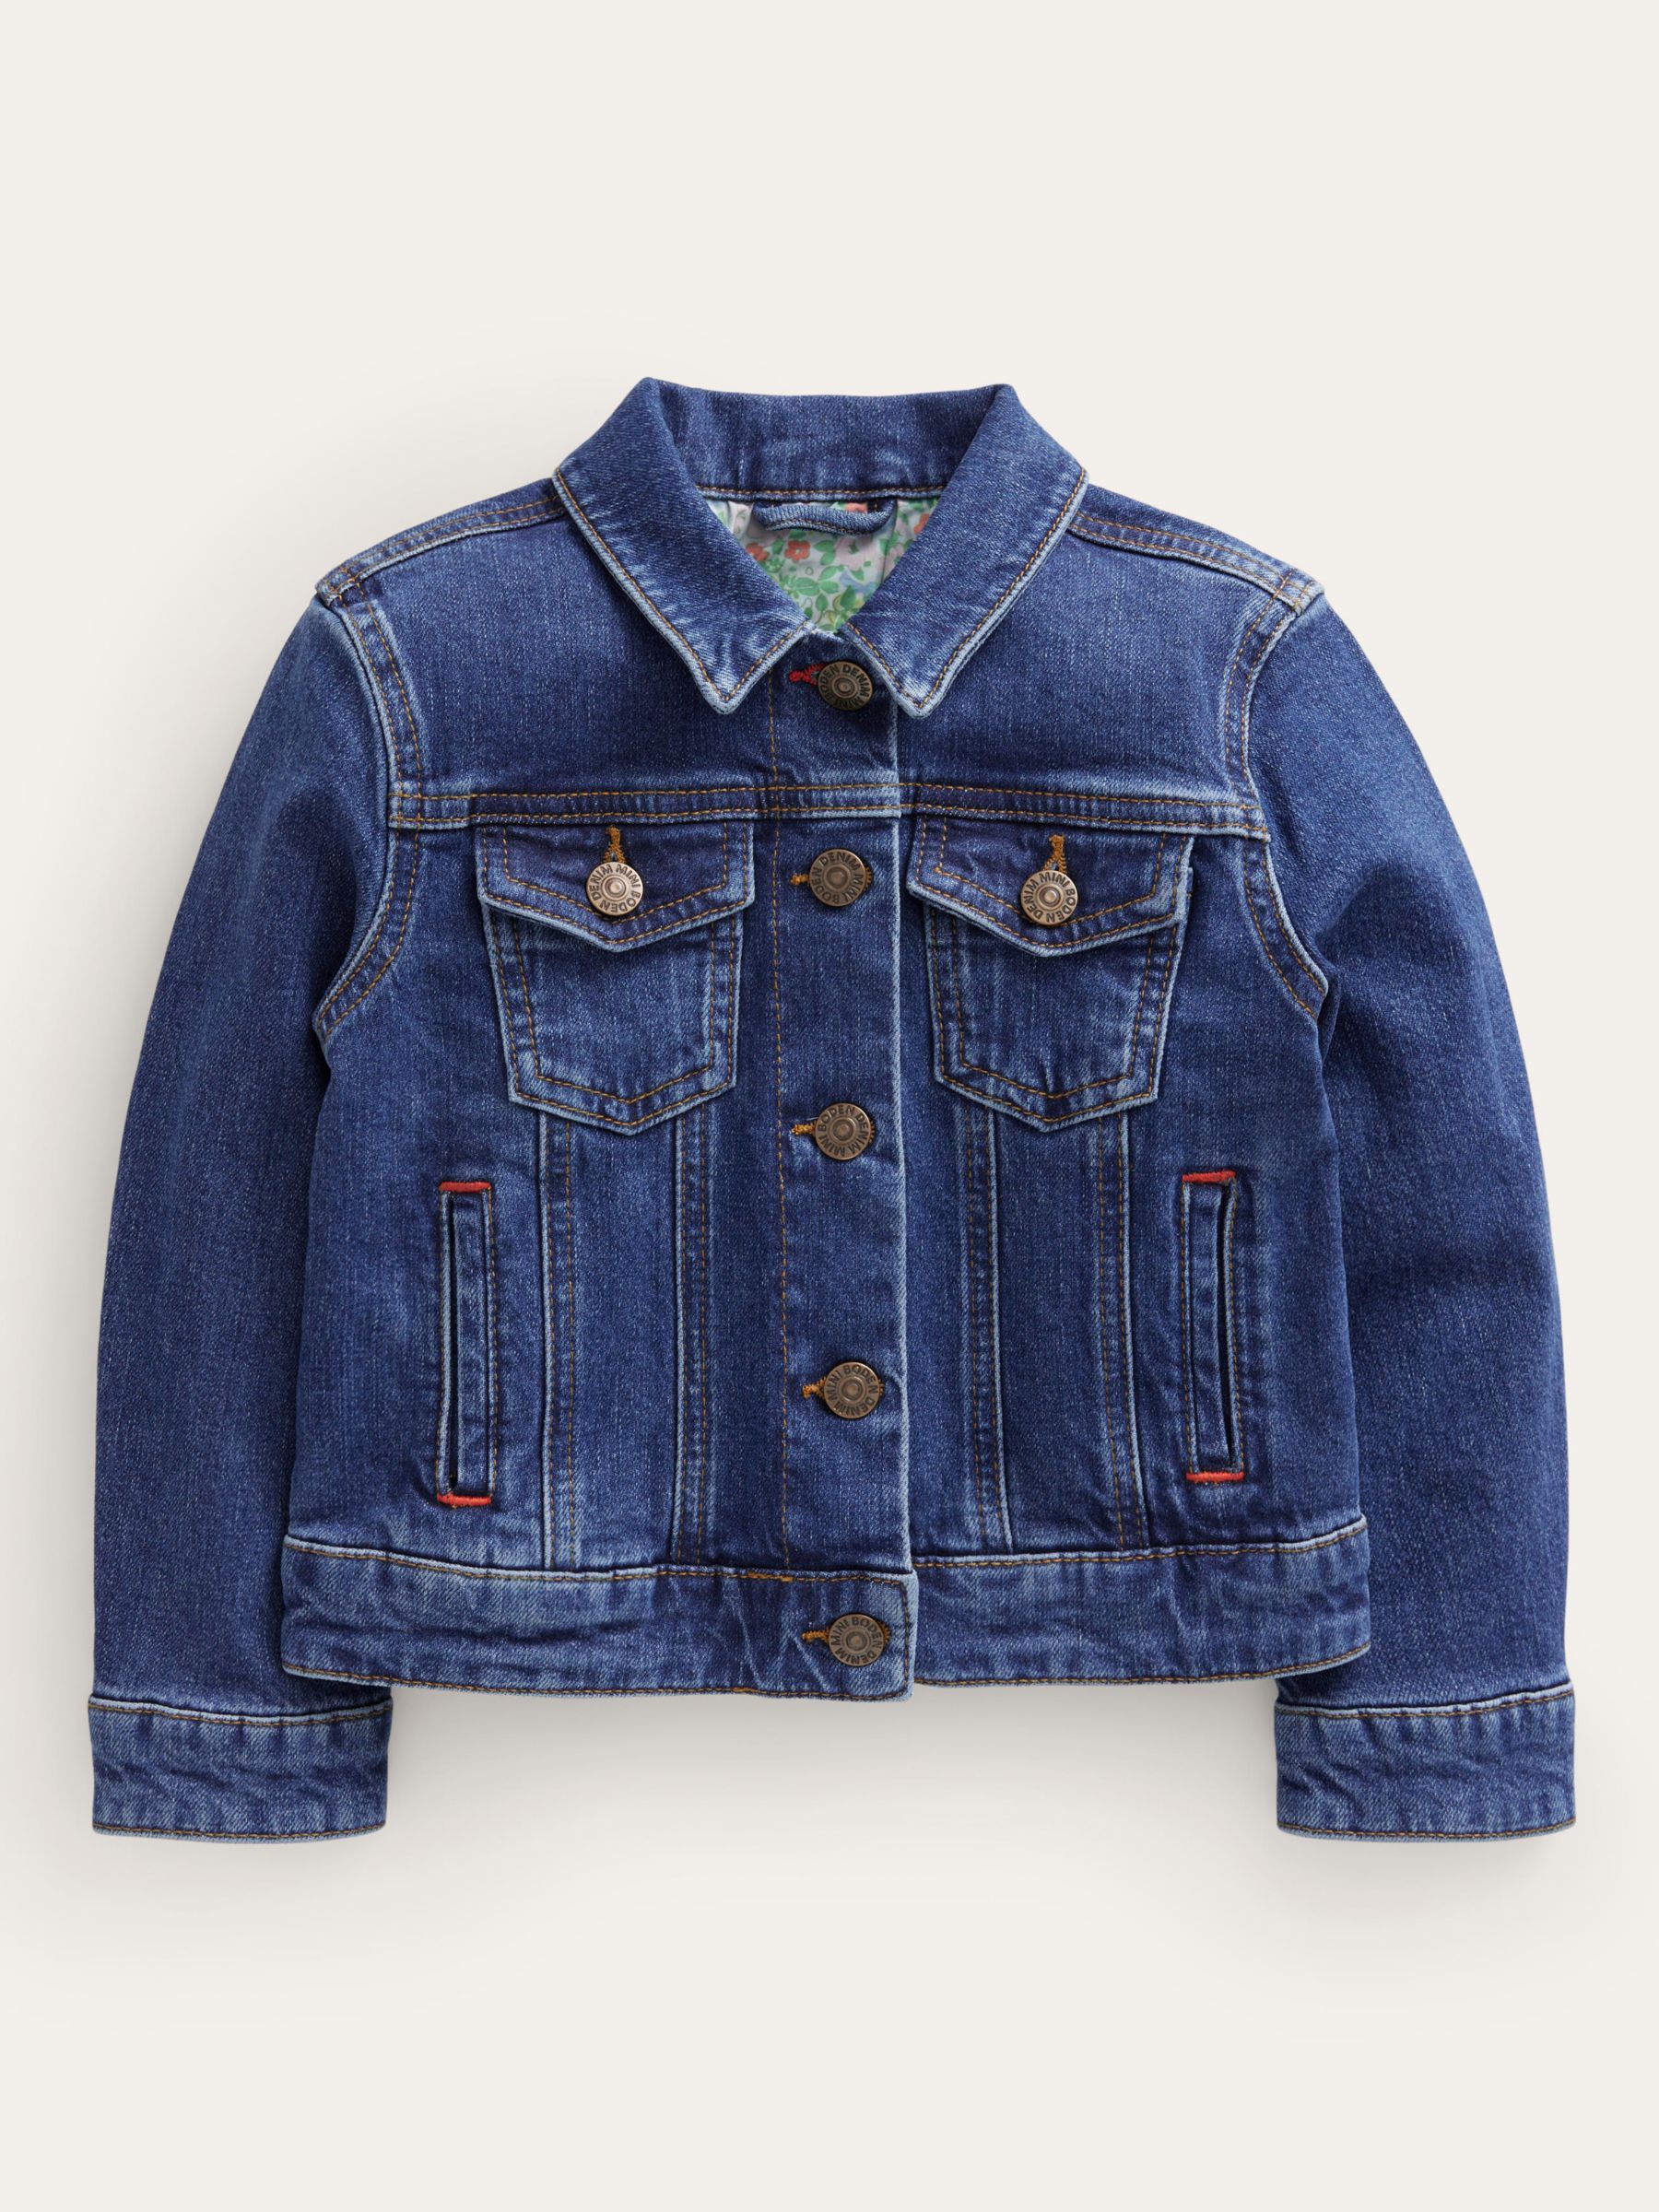 Long Jackets Women Chambray Utility Jacket Women's Basic Solid Color Button  Down Denim Cotton Jacket With Pockets Denim Jacket Coat Denim Lined Jacket